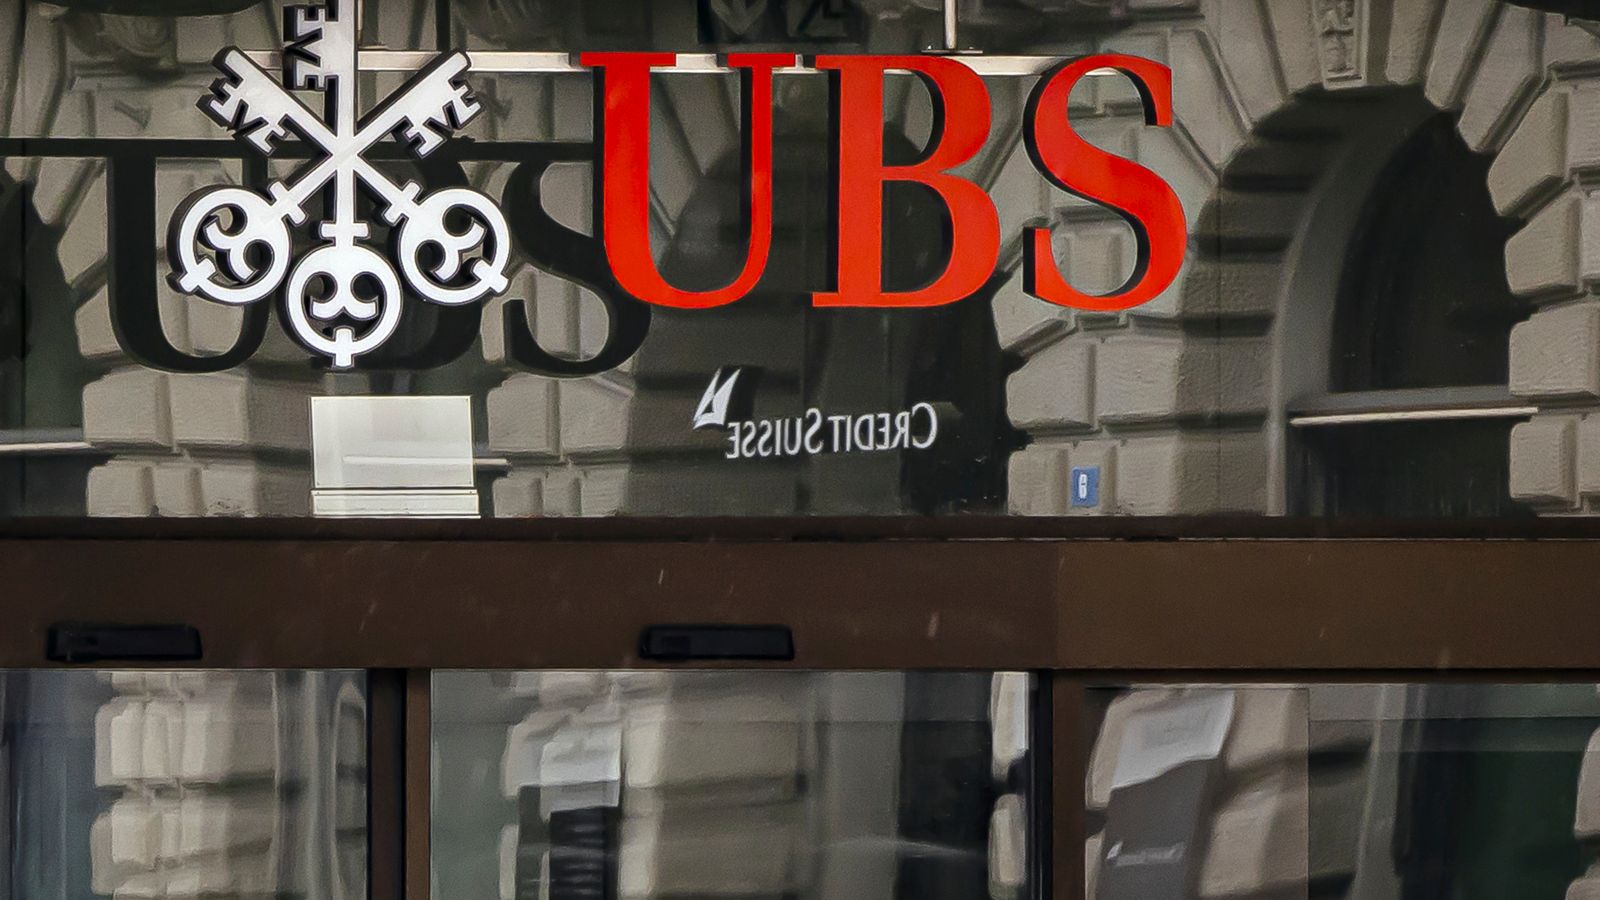 UBS to take over Credit Suisse, Swiss central bank confirms